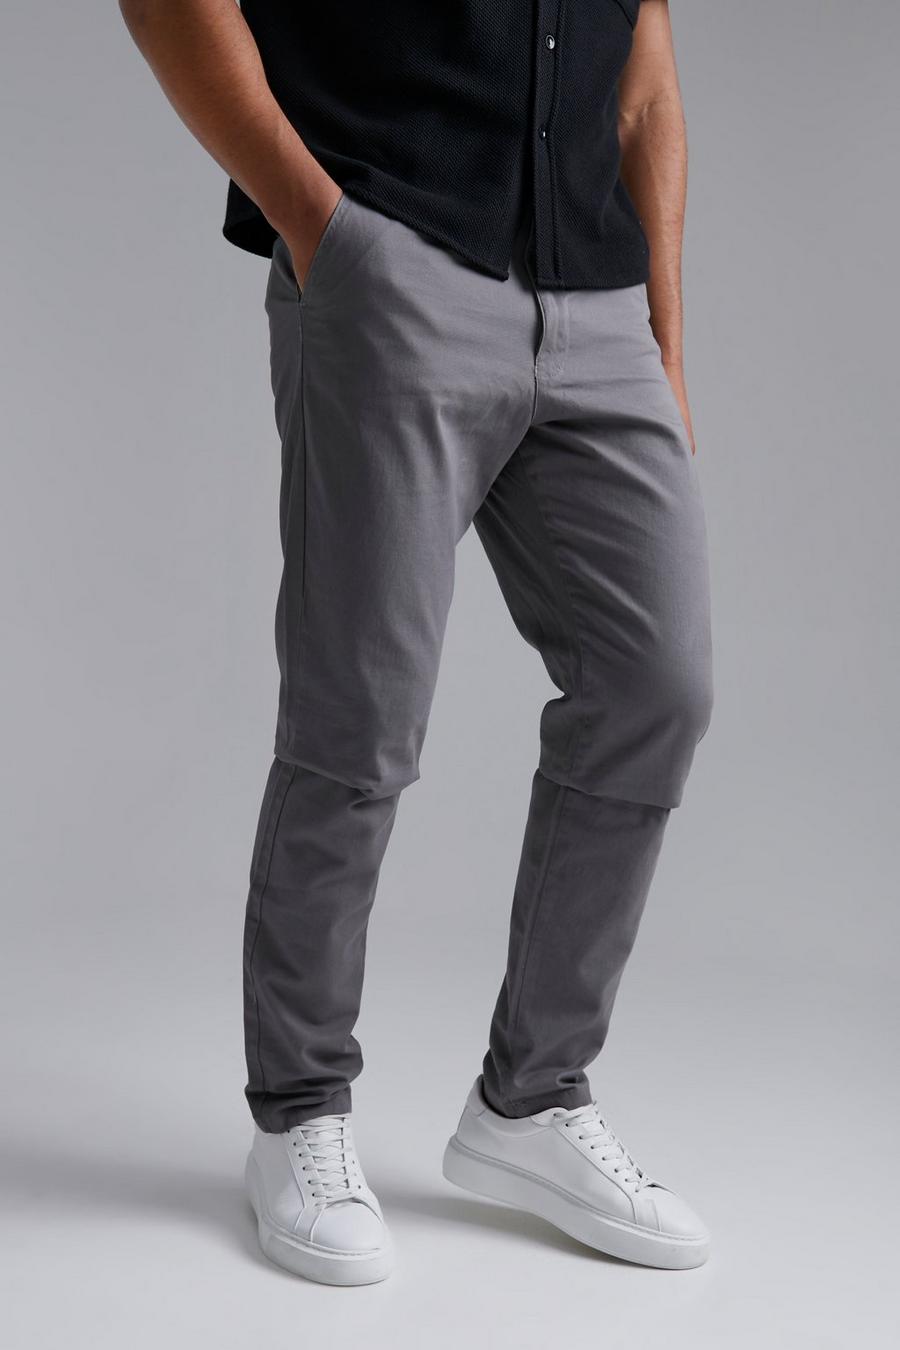 Tall Slim-Fit Chino-Hose, Charcoal gris